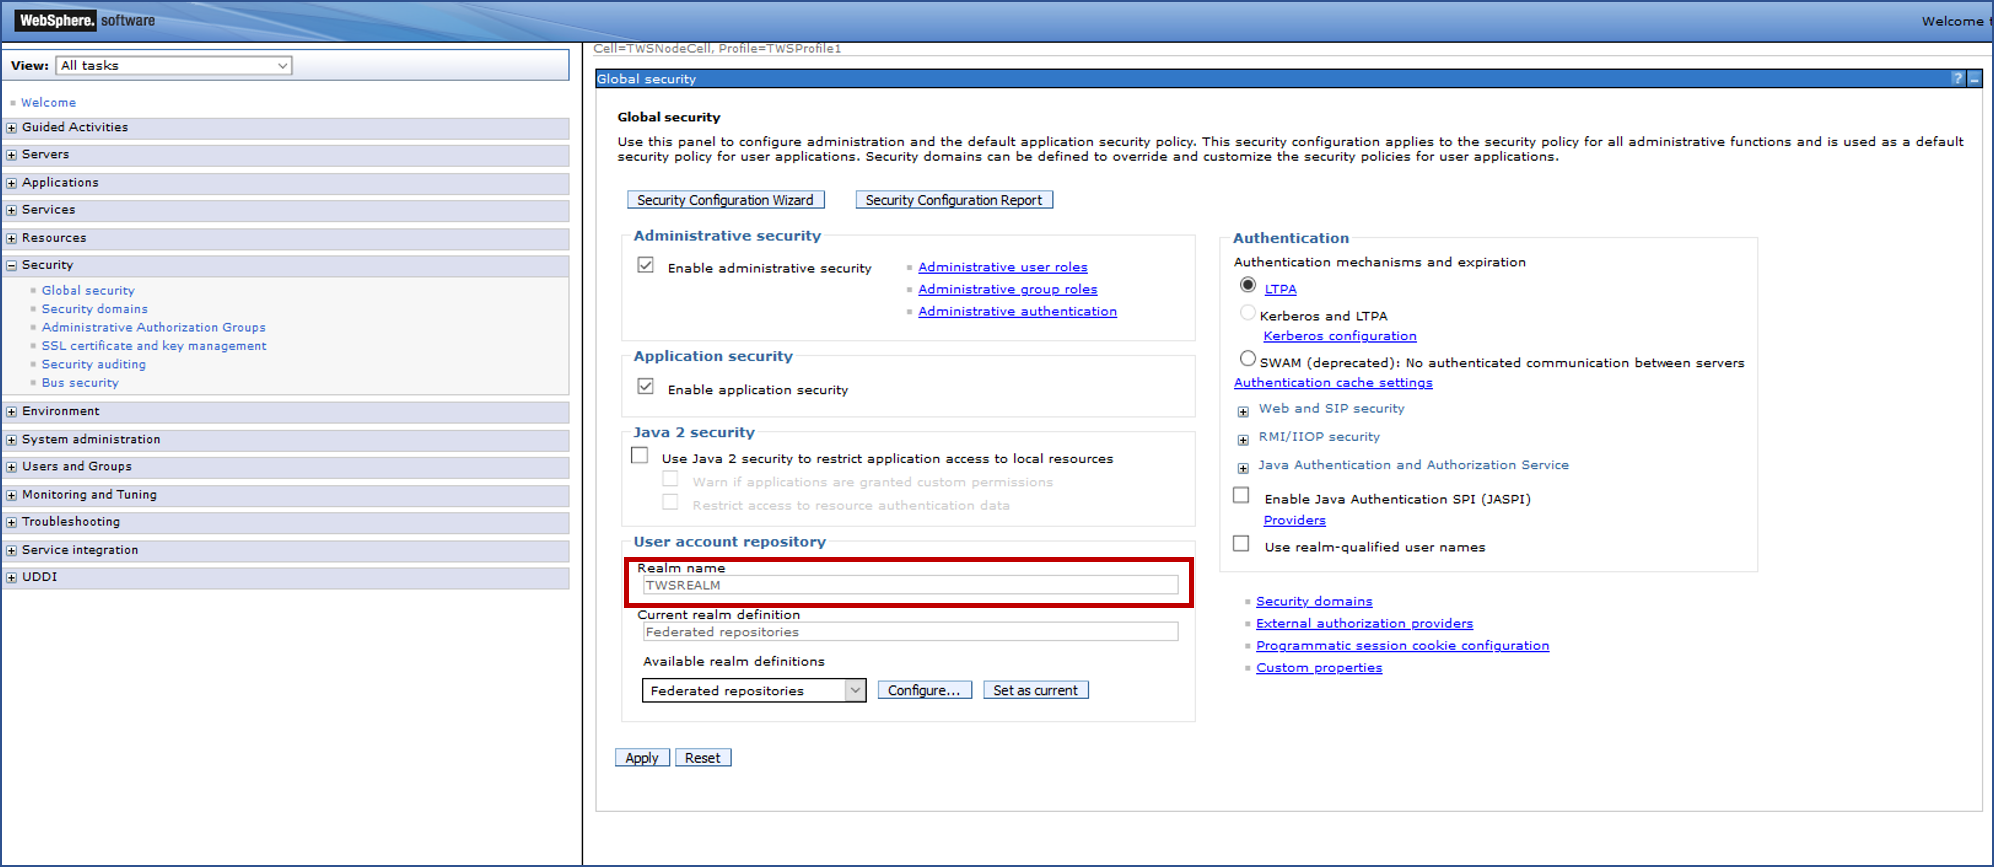 Realm name in the WebSphere administrative console